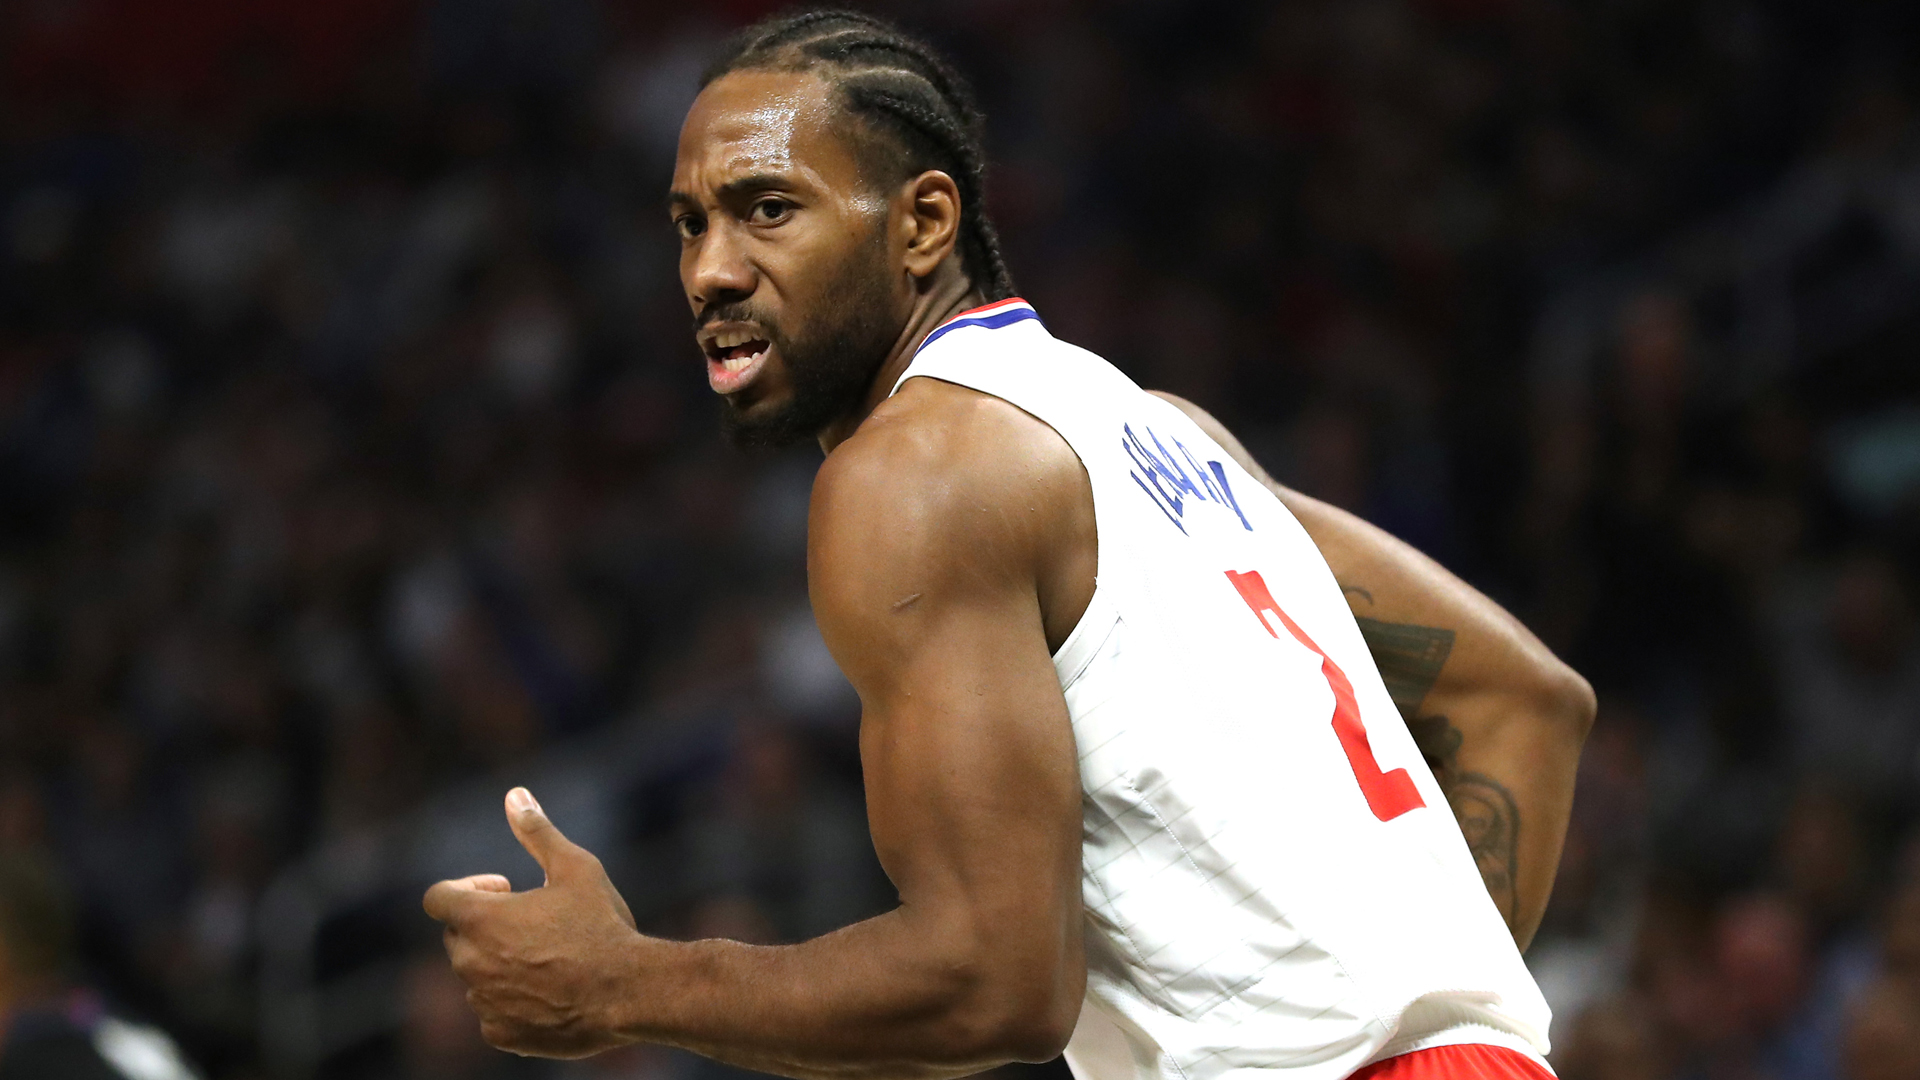 The NBA fined the Los Angeles Clippers over comments made about star Kawhi Leonard.